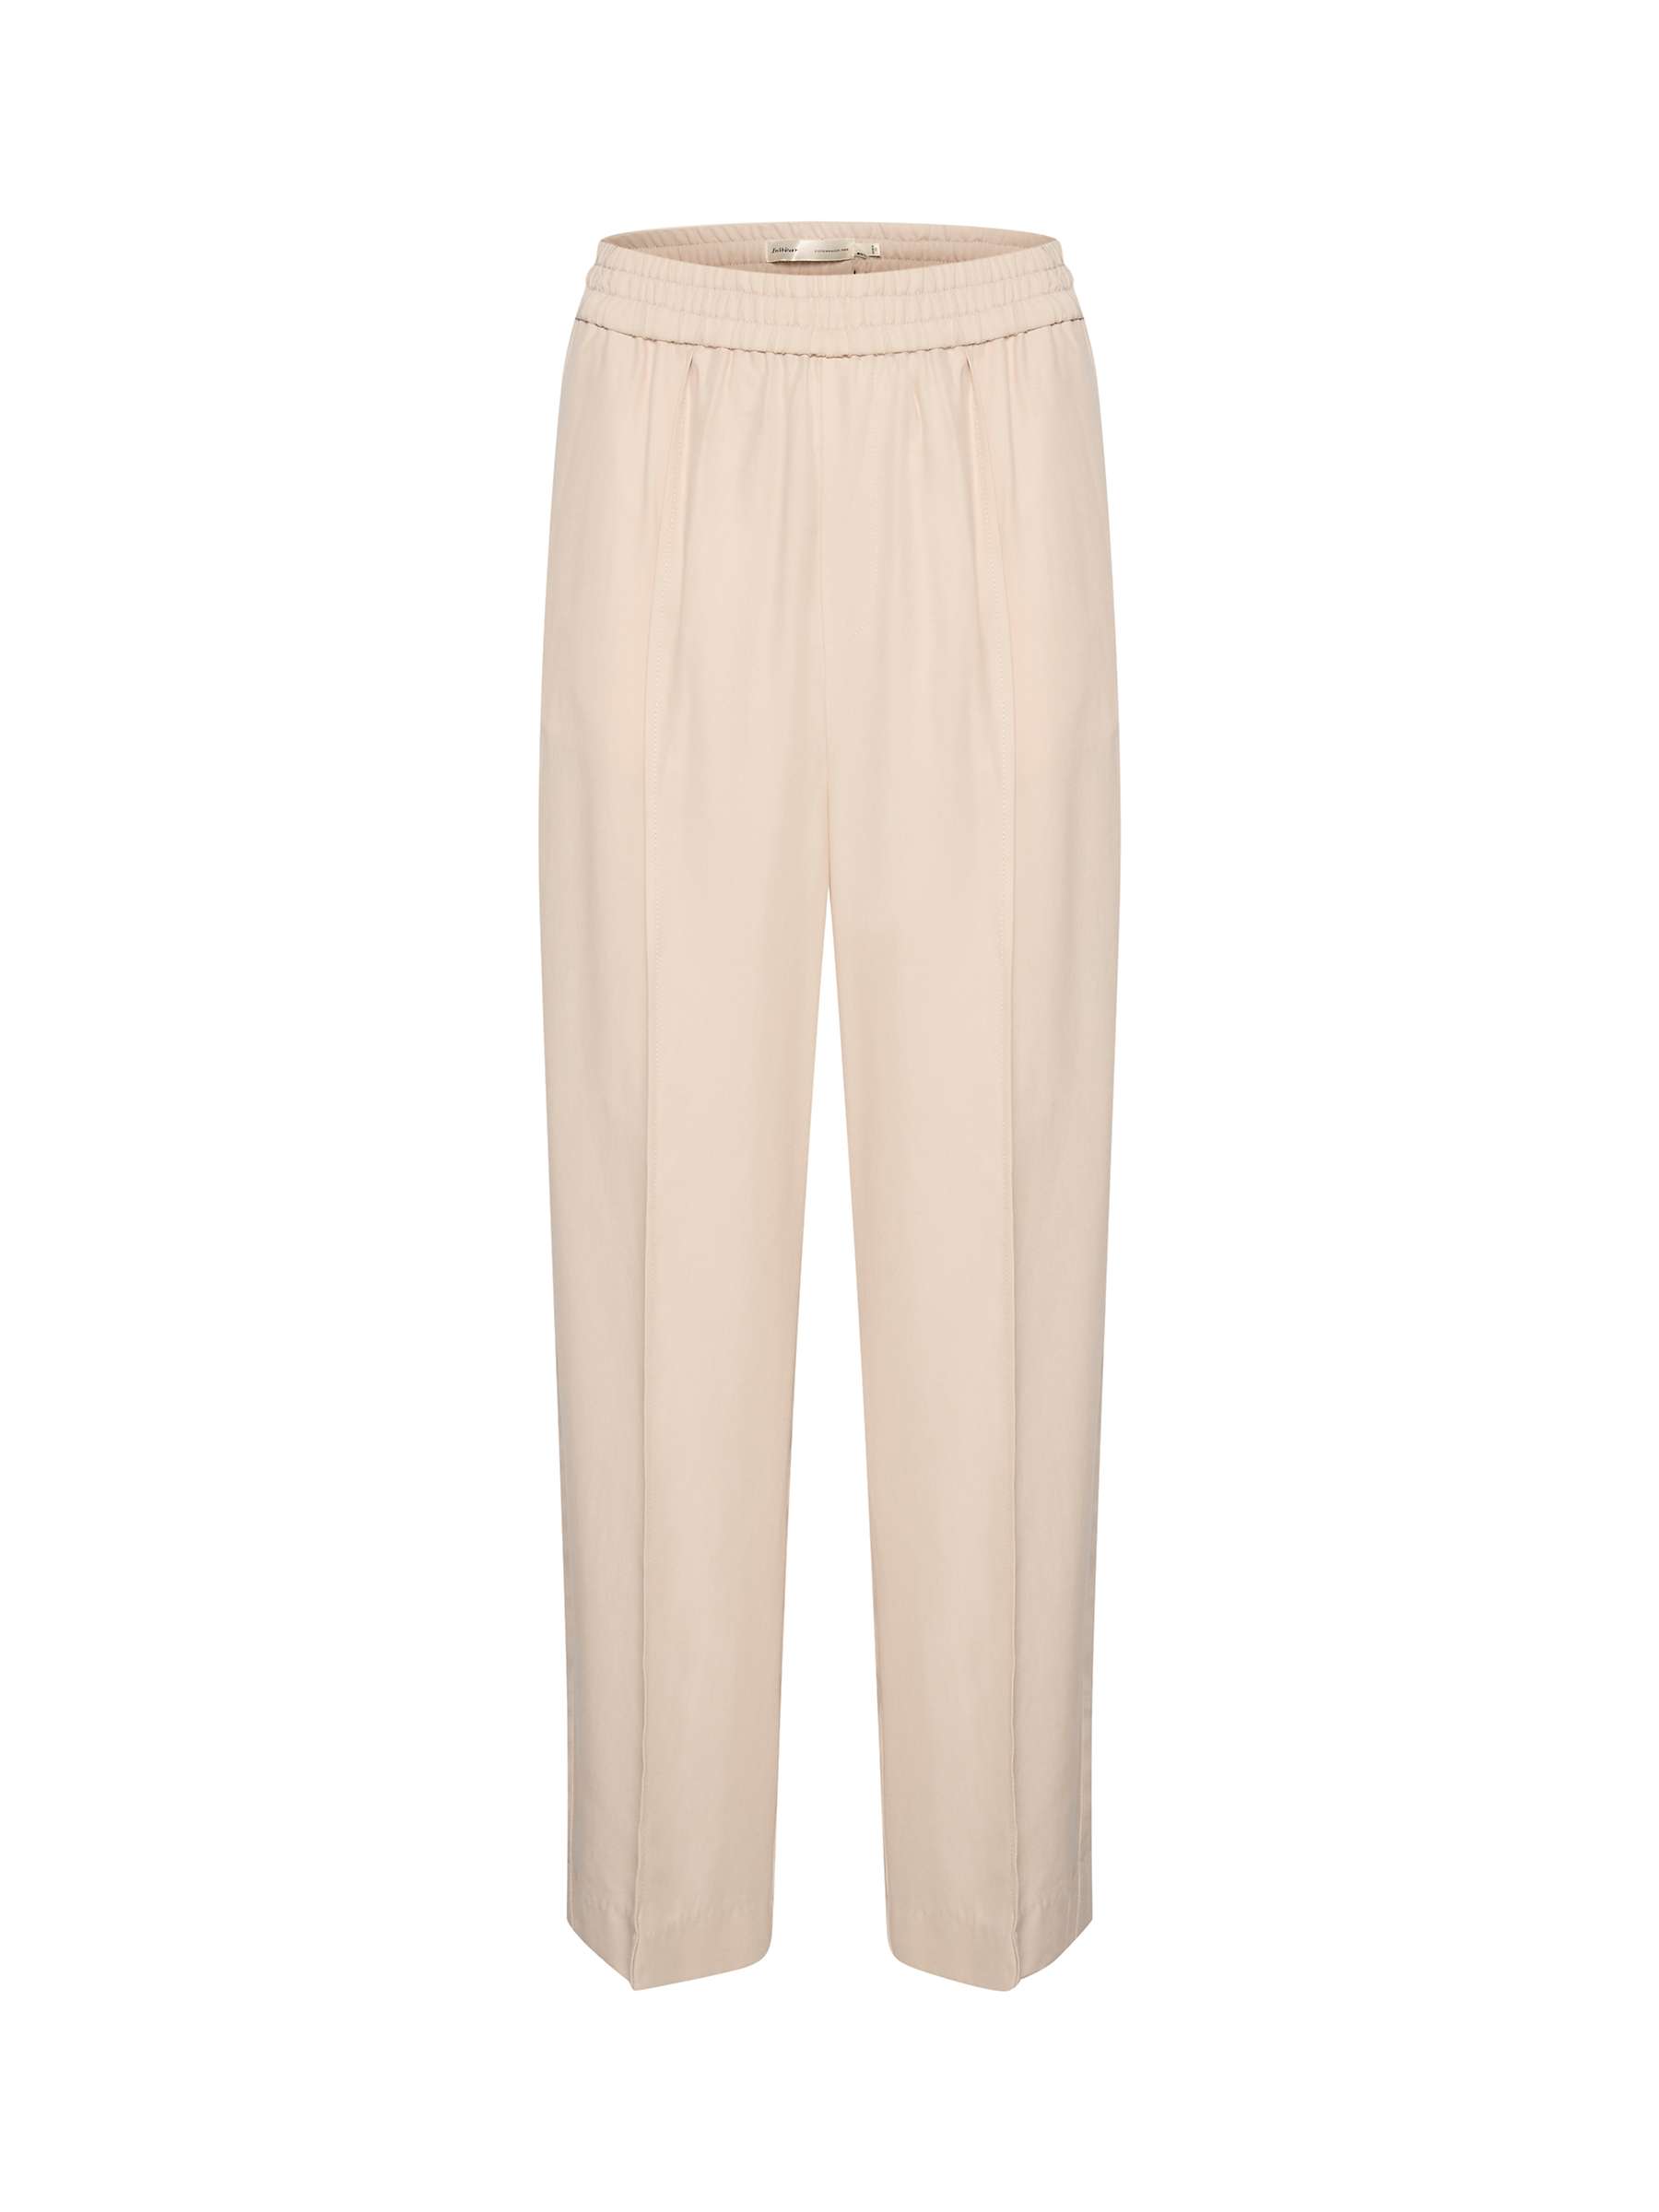 Buy InWear Pama Casual Trousers, French Oak Online at johnlewis.com